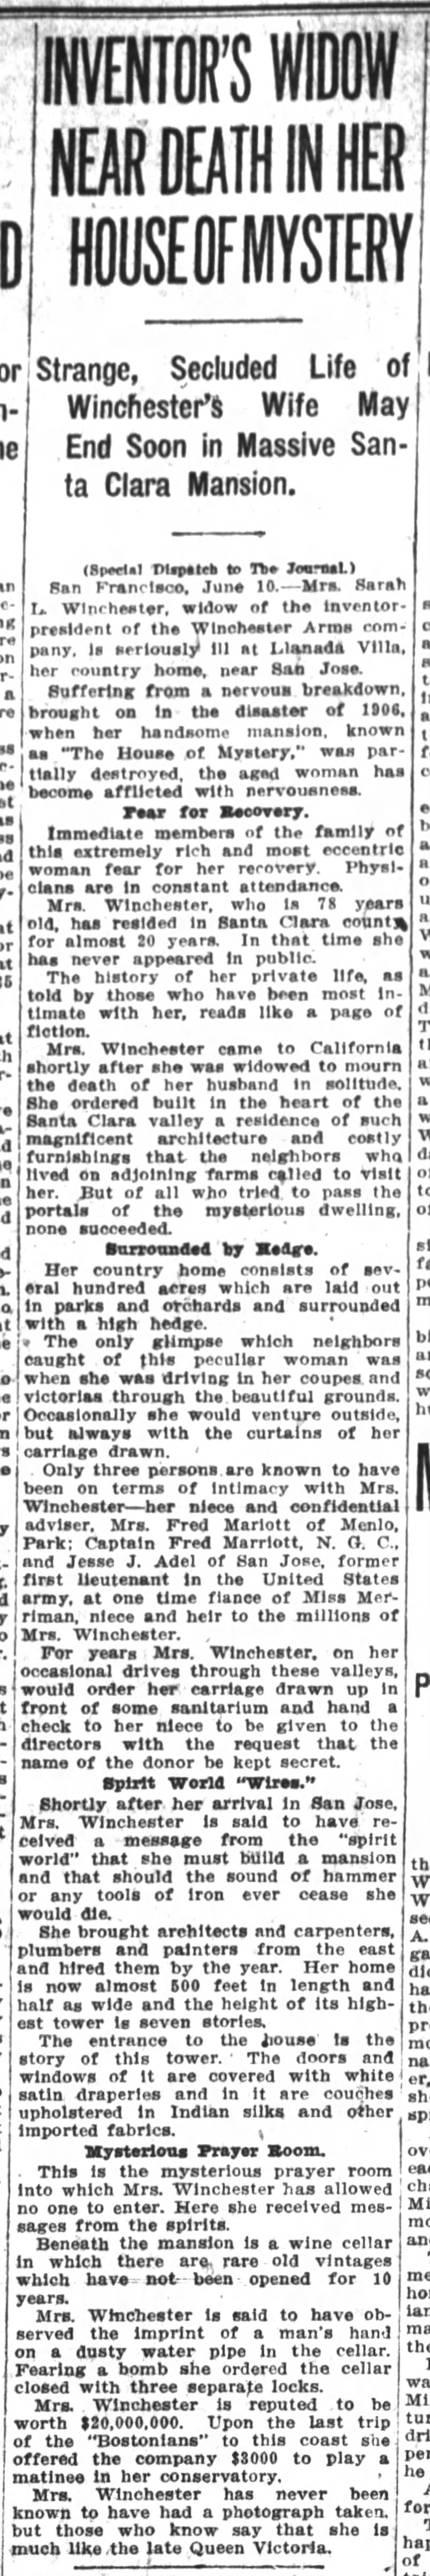 "Inventor's Widow Near Death in Her House of Mystery"; "Strange, Secluded Life of Winchester's Wife"